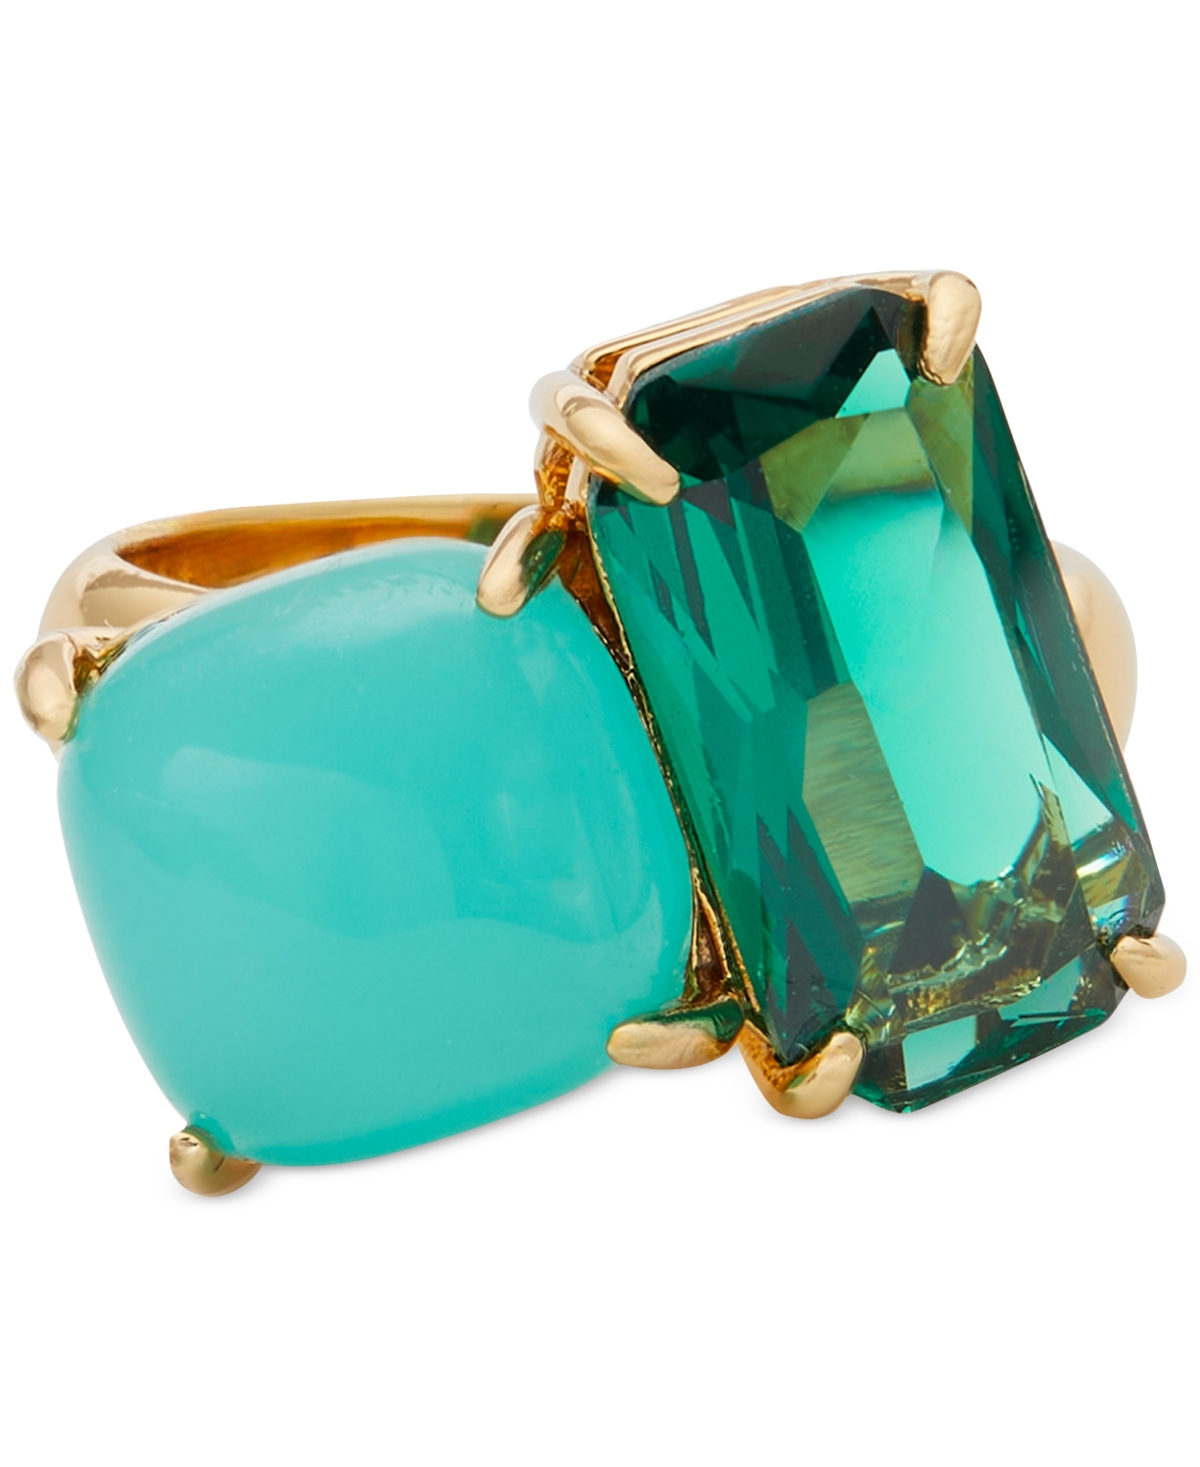 Gold-Tone Double Crystal Statement Ring - Green Mult